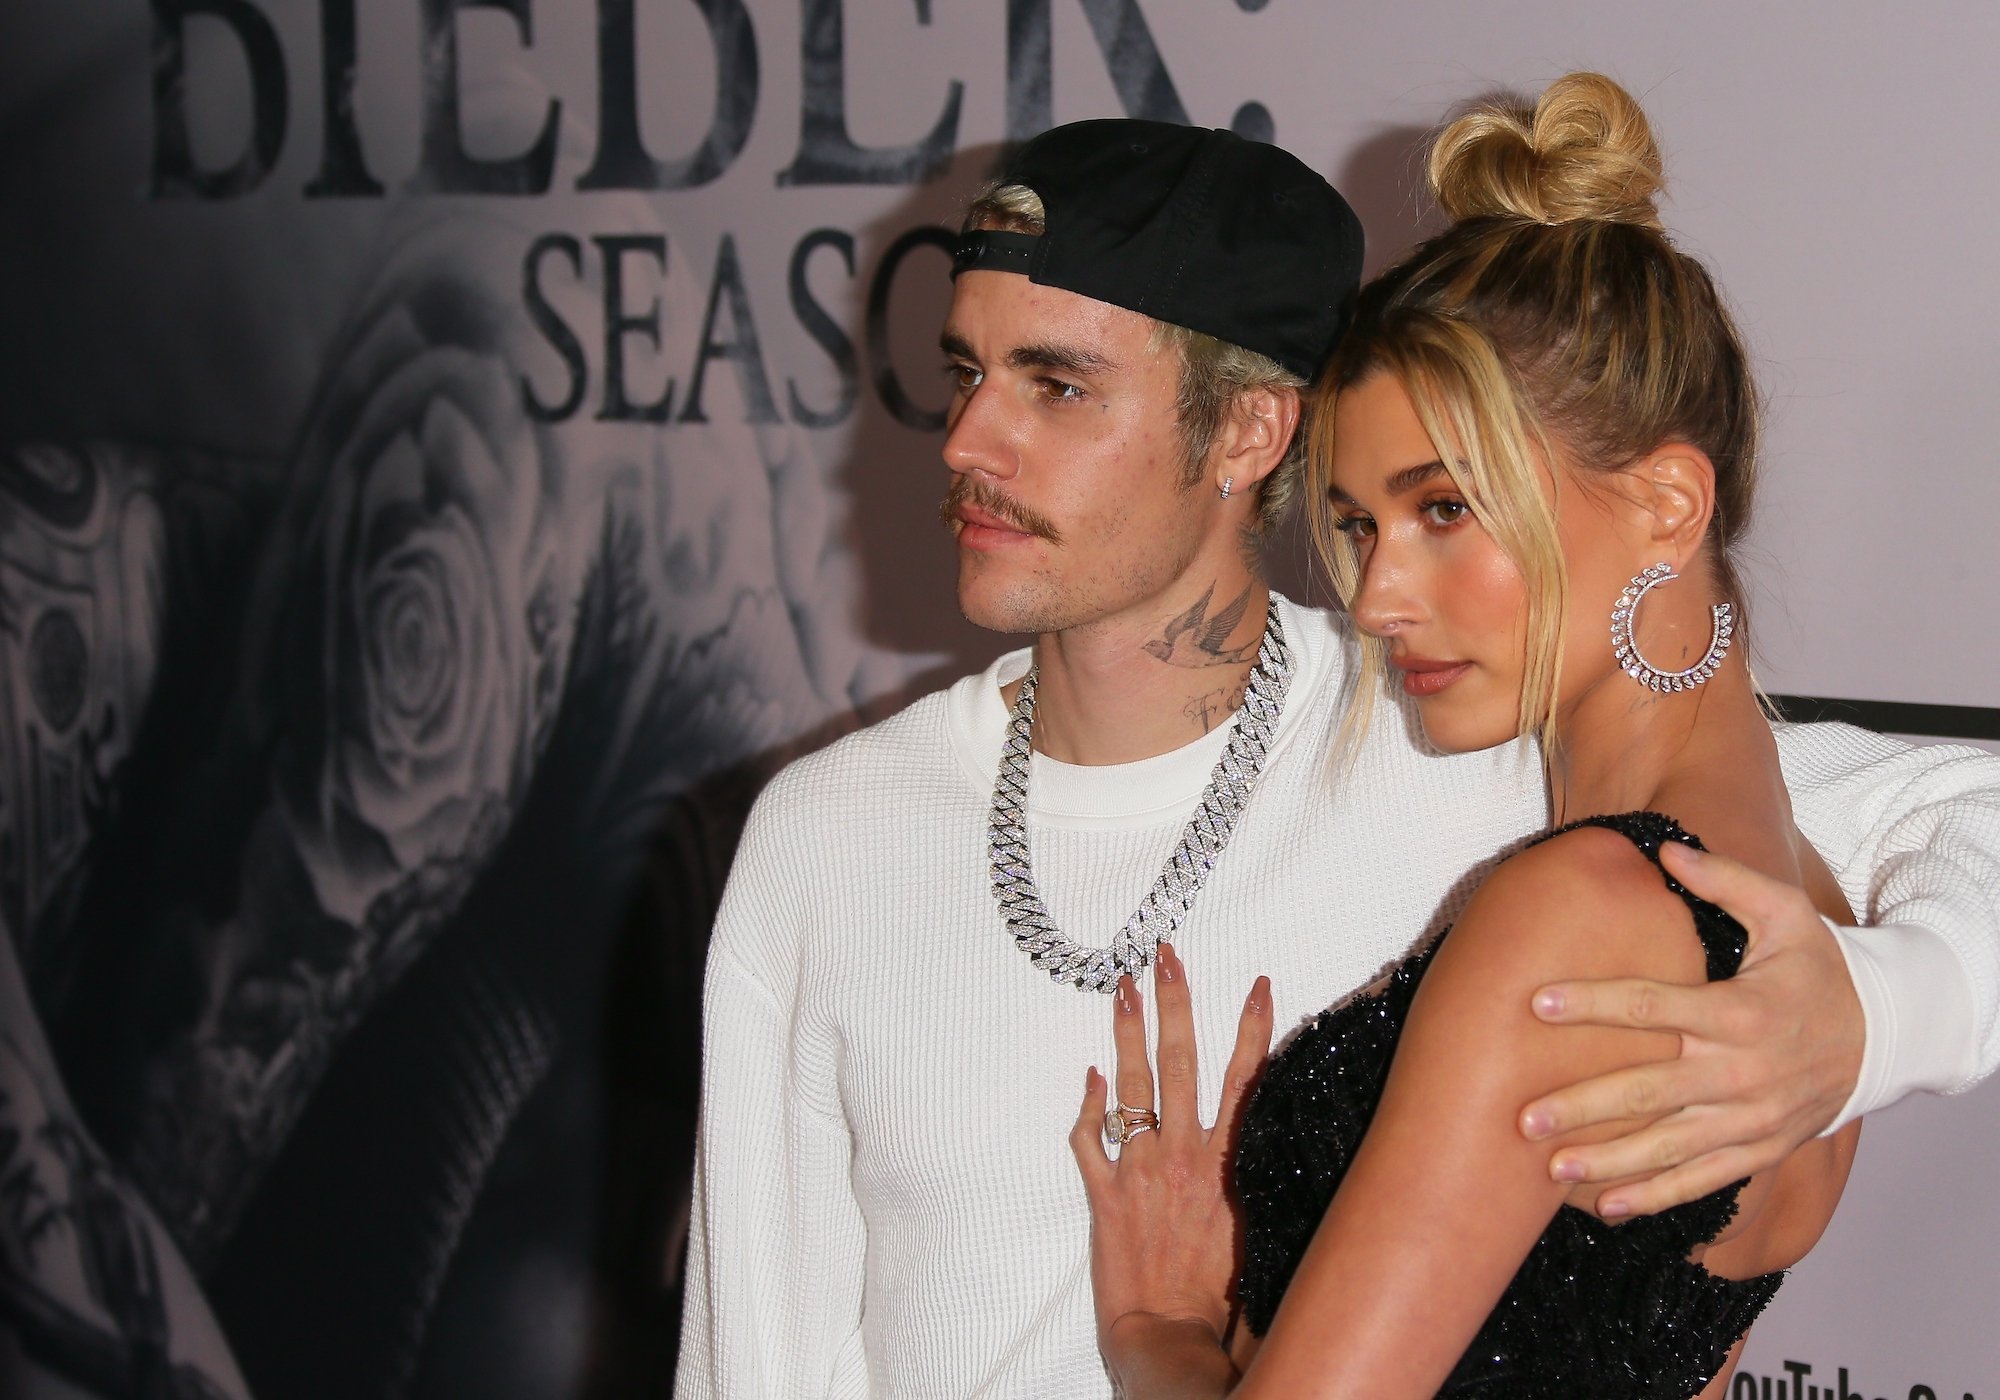 Justin Bieber’s ‘Justice’ Lyrics Reveal Details of His Relationship With Hailey Baldwin